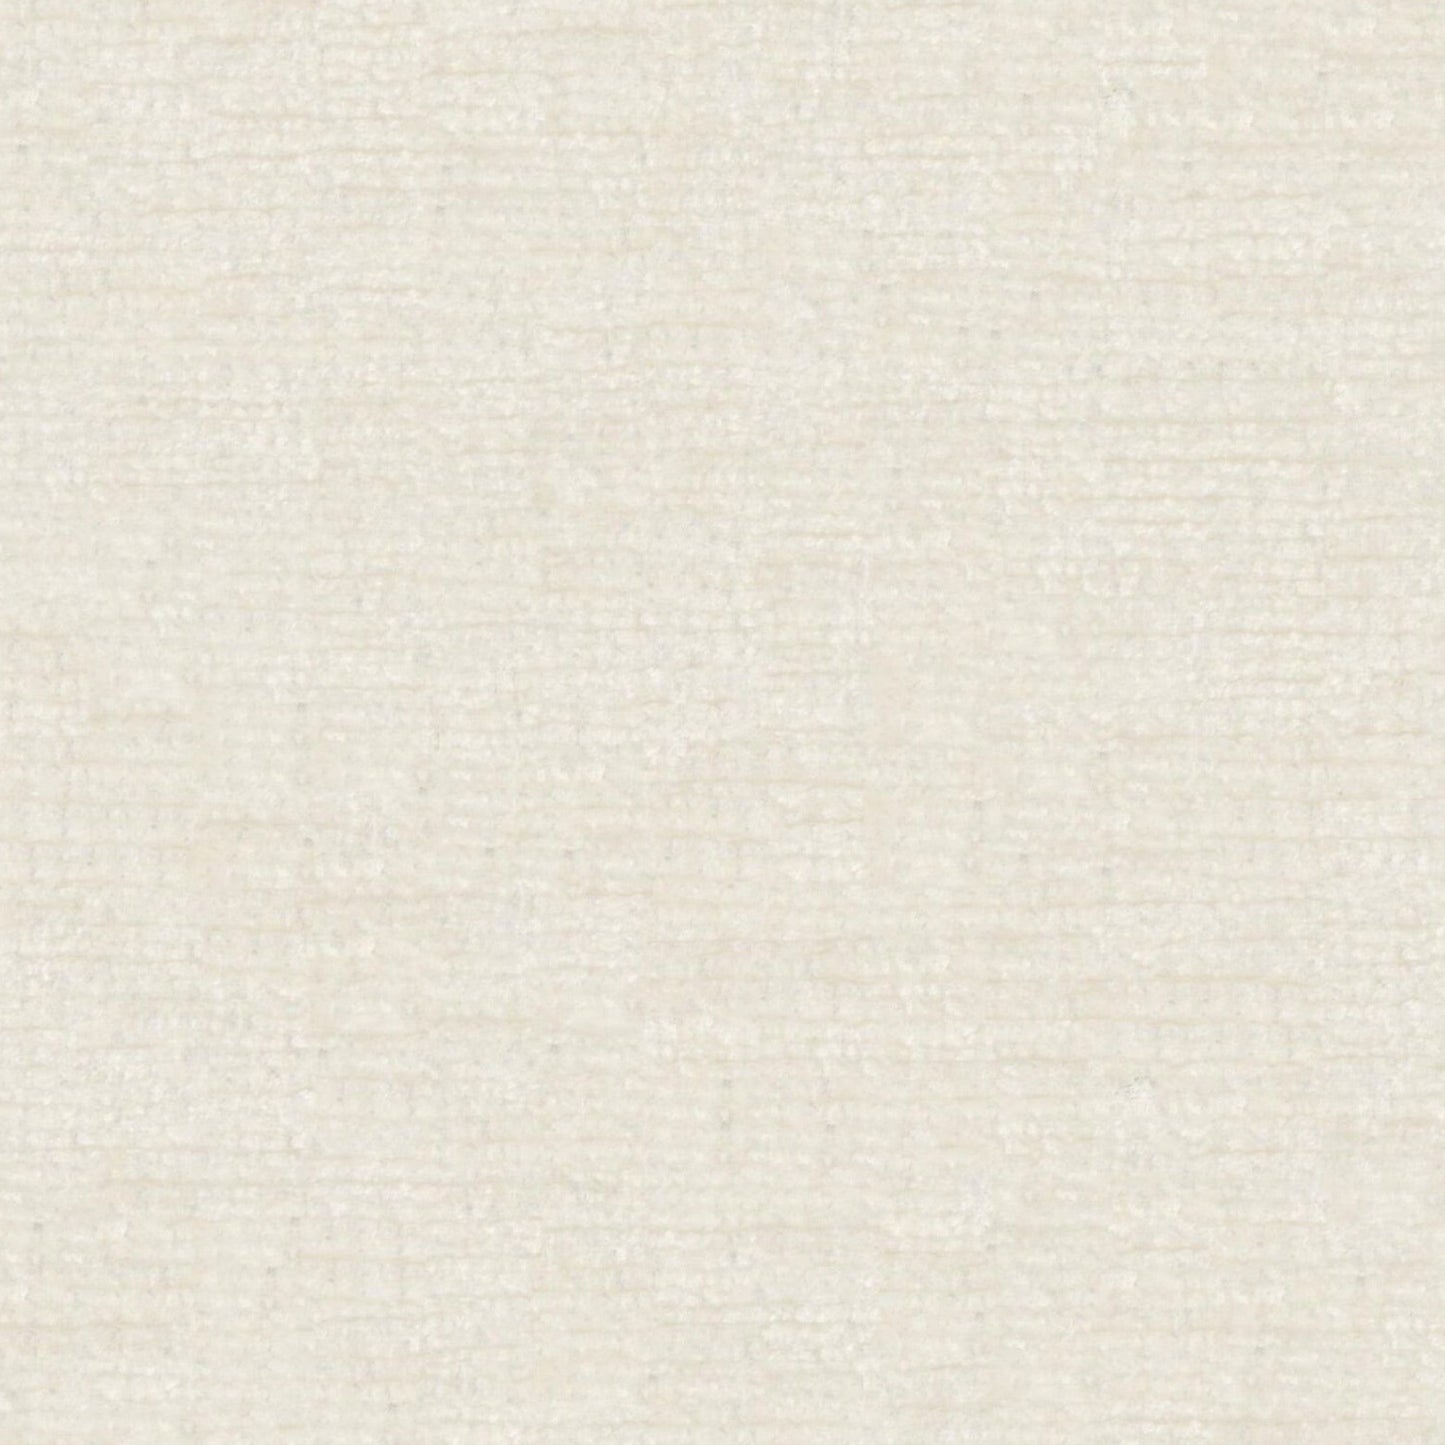 MONSIEUR WHISPER LUXURY CHENILLE FABRIC SAMPLE | SPECIAL COLLECTION | # 2